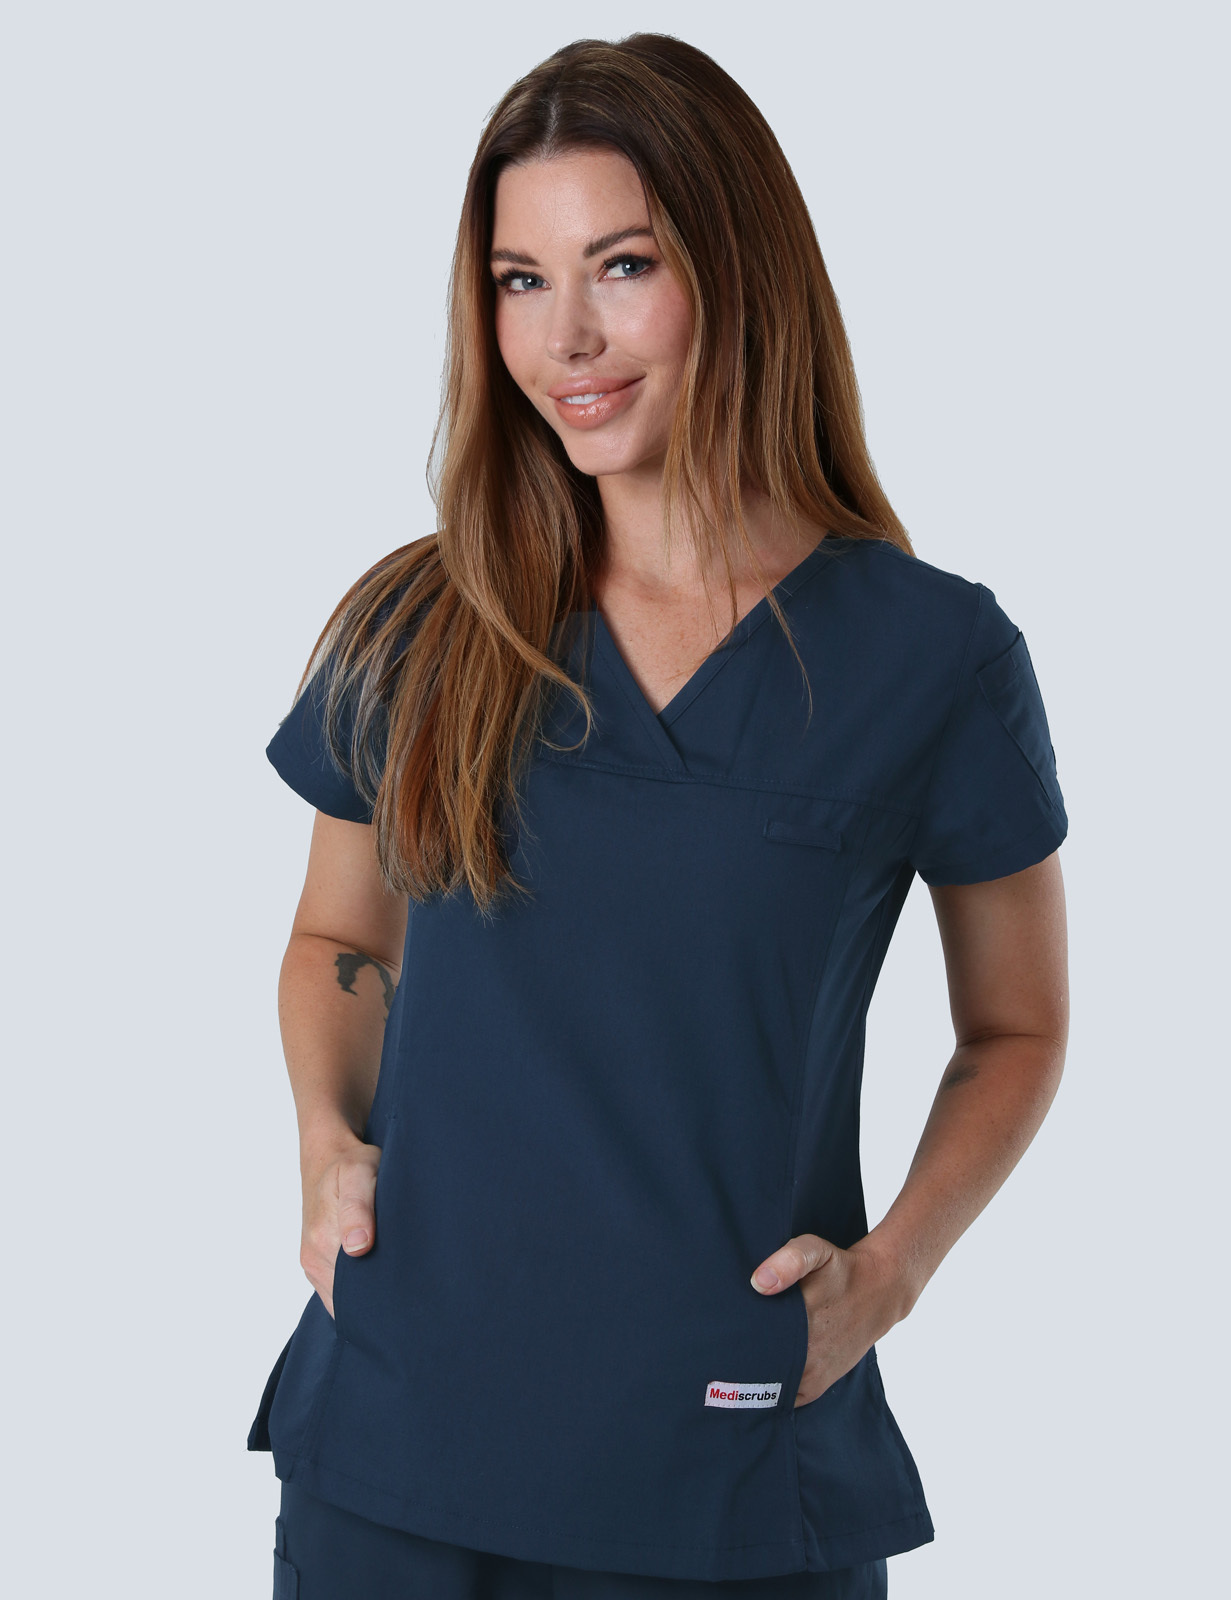 Canberra Hospital - Emergency Department (MHAU) (Women's Fit Solid Scrub Top and Cargo Pants in Navy incl Logos)